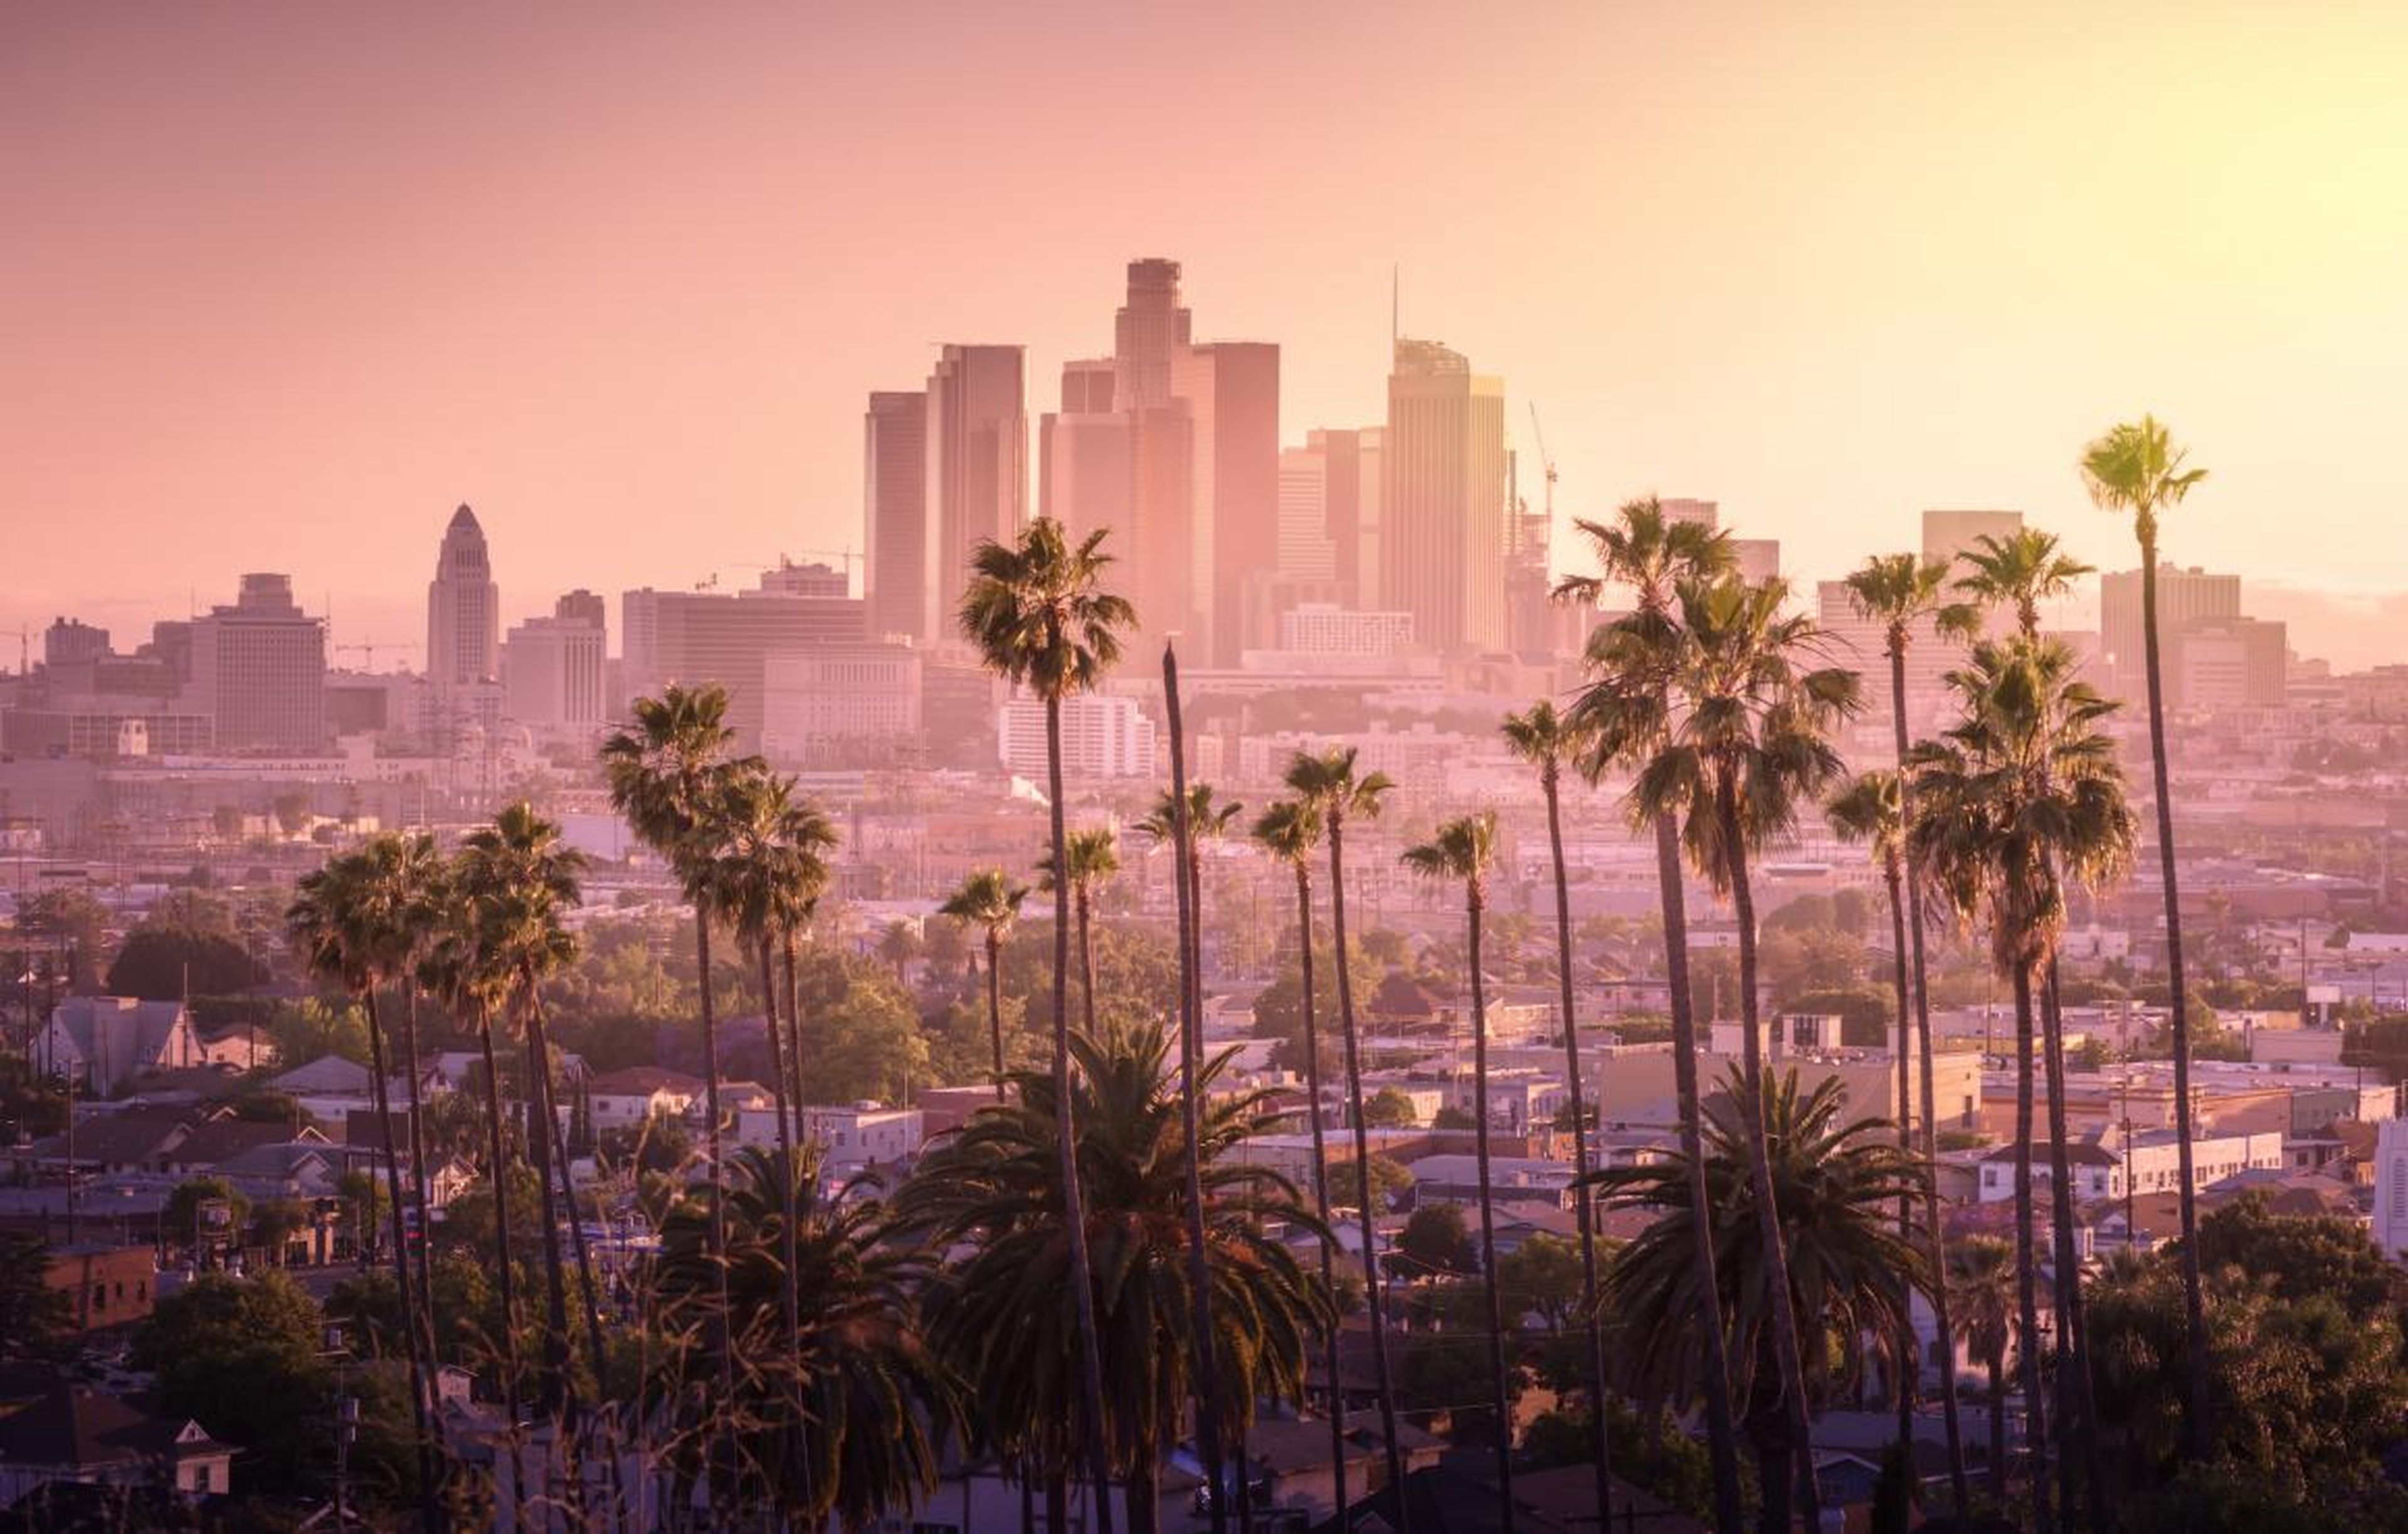 1. Los Angeles. The INRIX study for "The City of Angels" to have the most stressful commute in the U.S. In fact, the average commuter in LA spends over 100 hours a year in traffic jams.